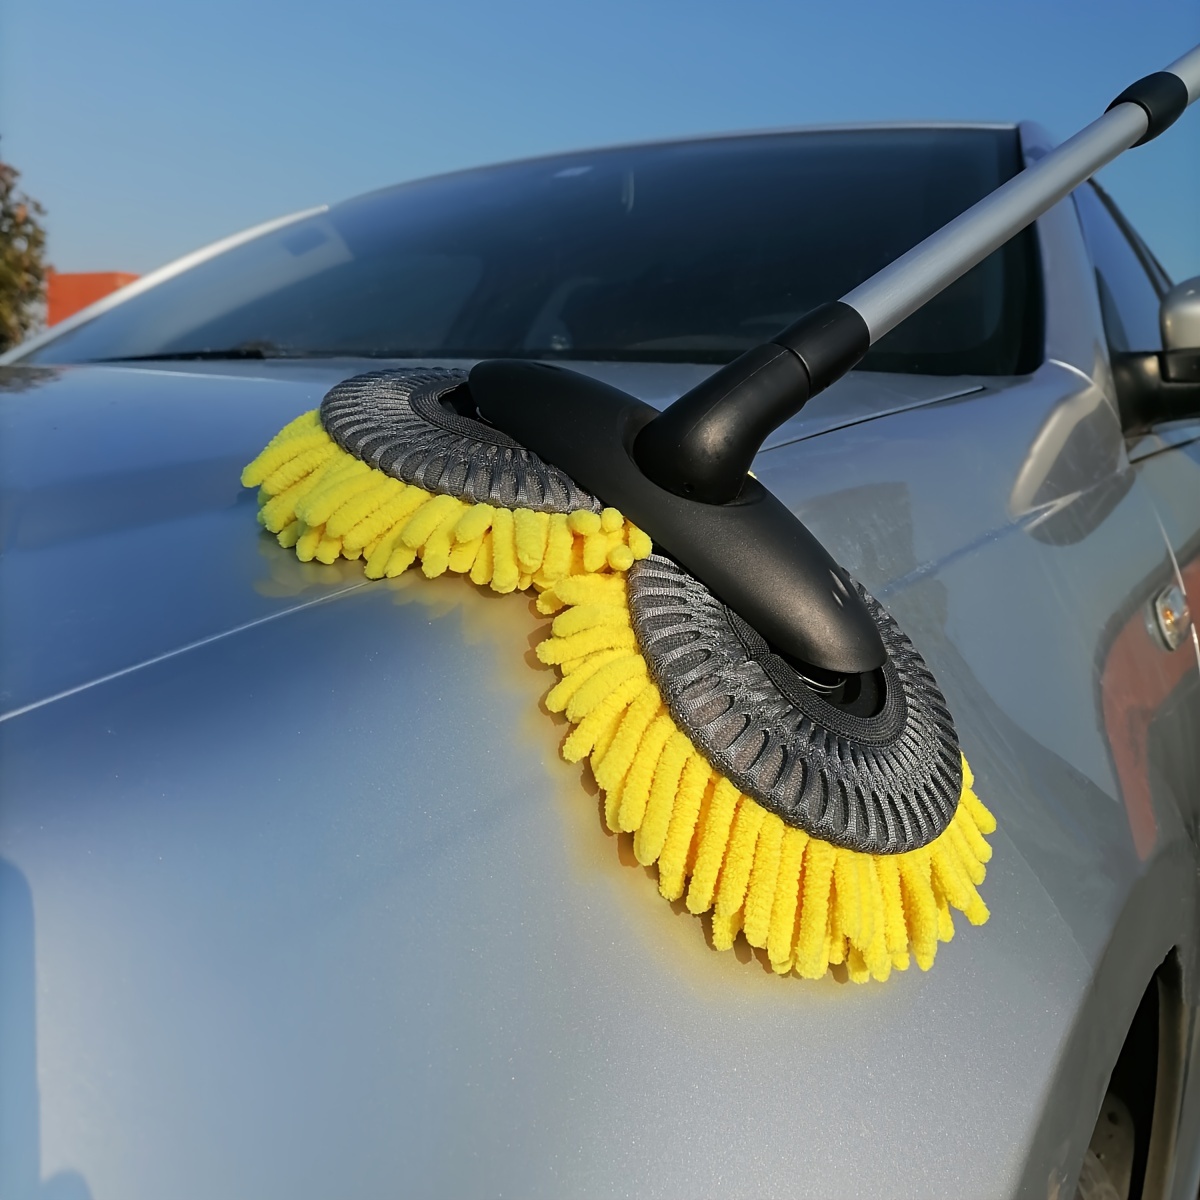 

The Yellow Sunflower-shaped Mop The Snow Double-headed Rotating Car Wash Mop Is A High-value Creative Mop With An Adjustable Metal Pole That Can Be Extended And Shortened For Cleaning And Car Washing